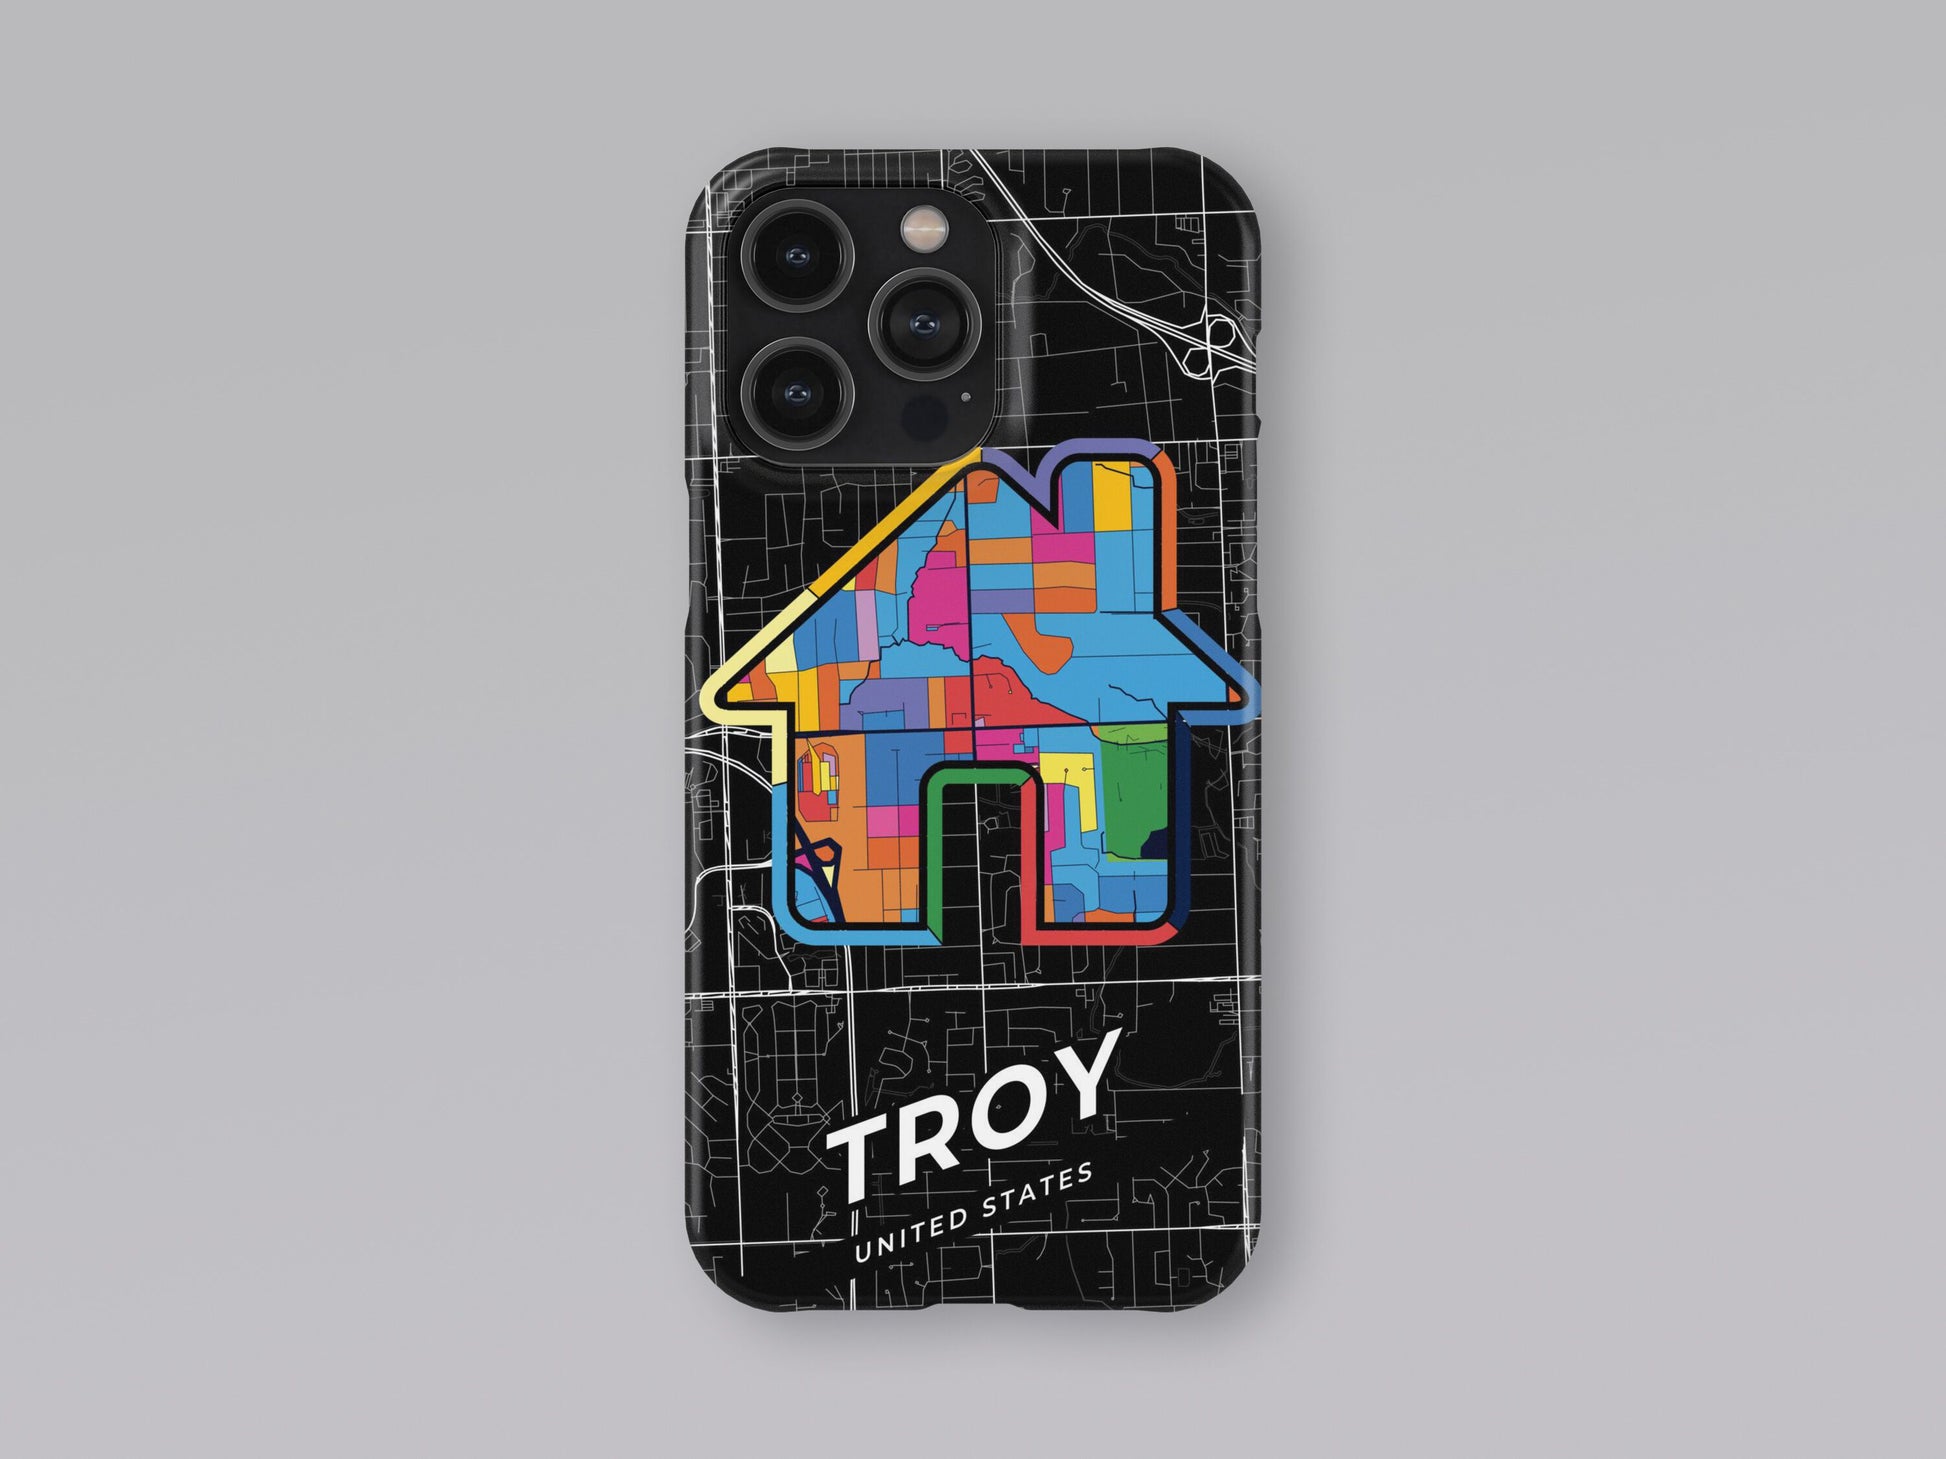 Troy Michigan slim phone case with colorful icon 3